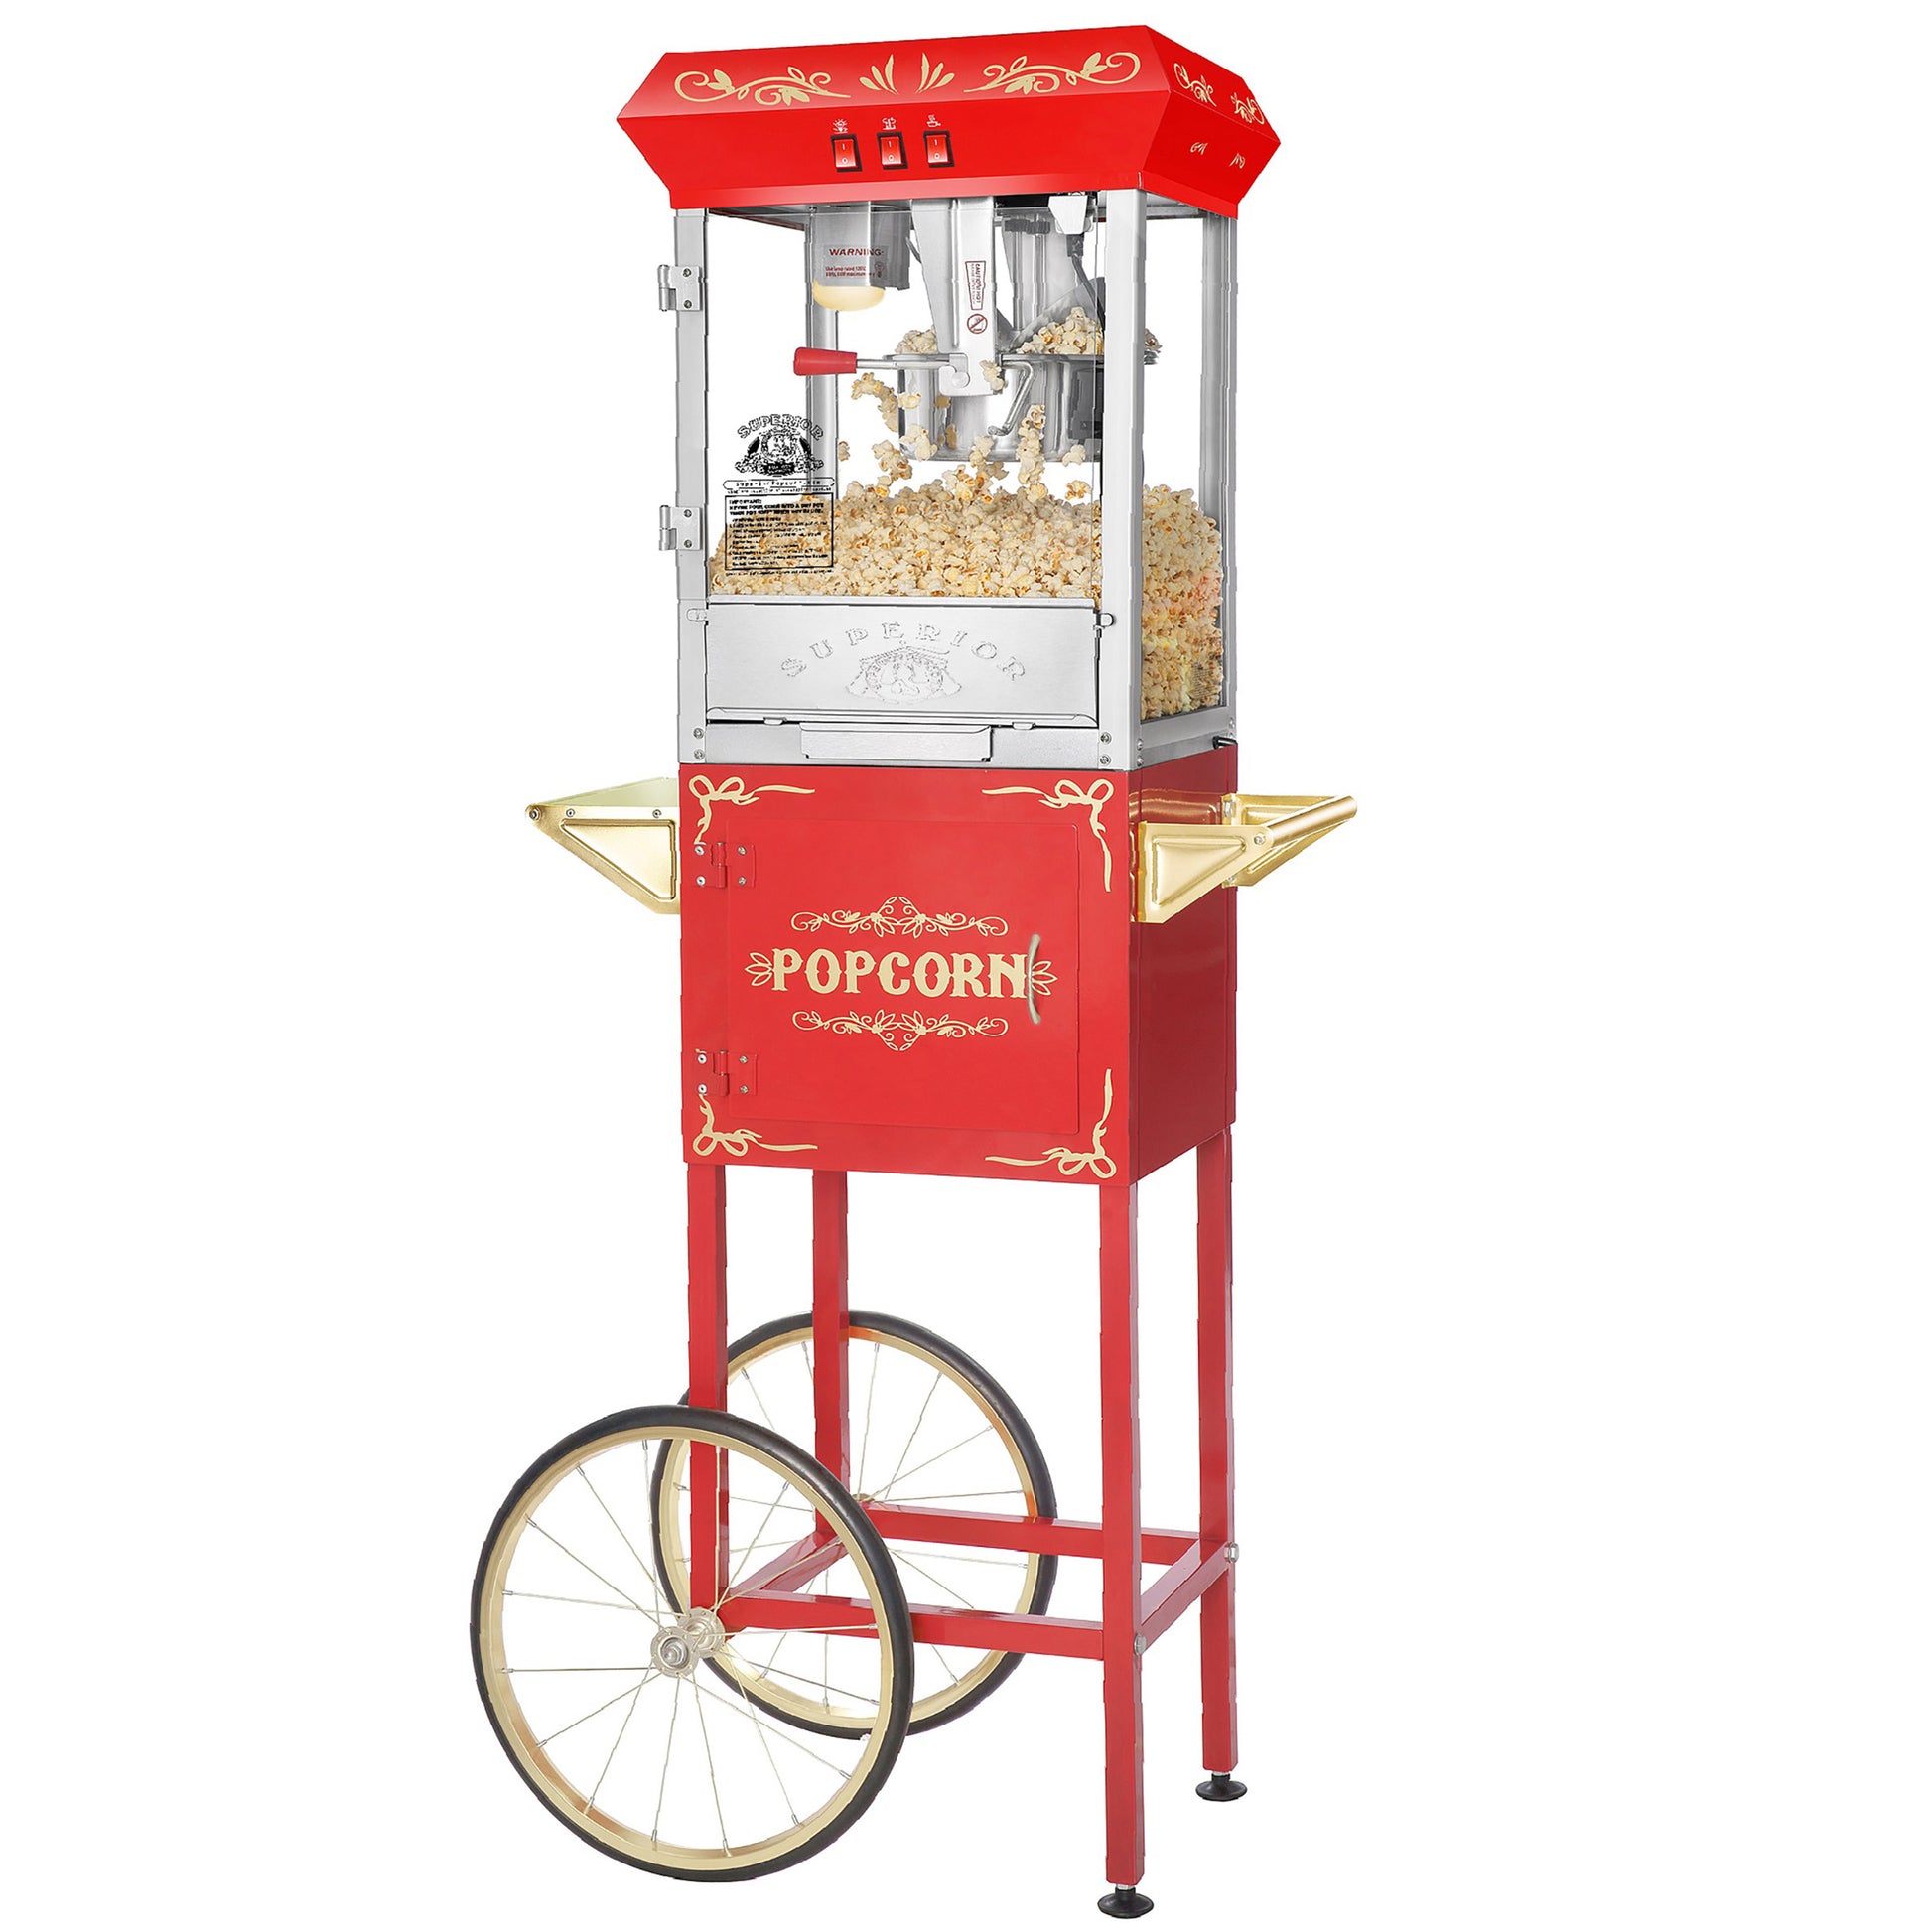 Olde Midway Movie Theater-Style Countertop Popcorn Machine Popper with 8 oz Kettle, Red